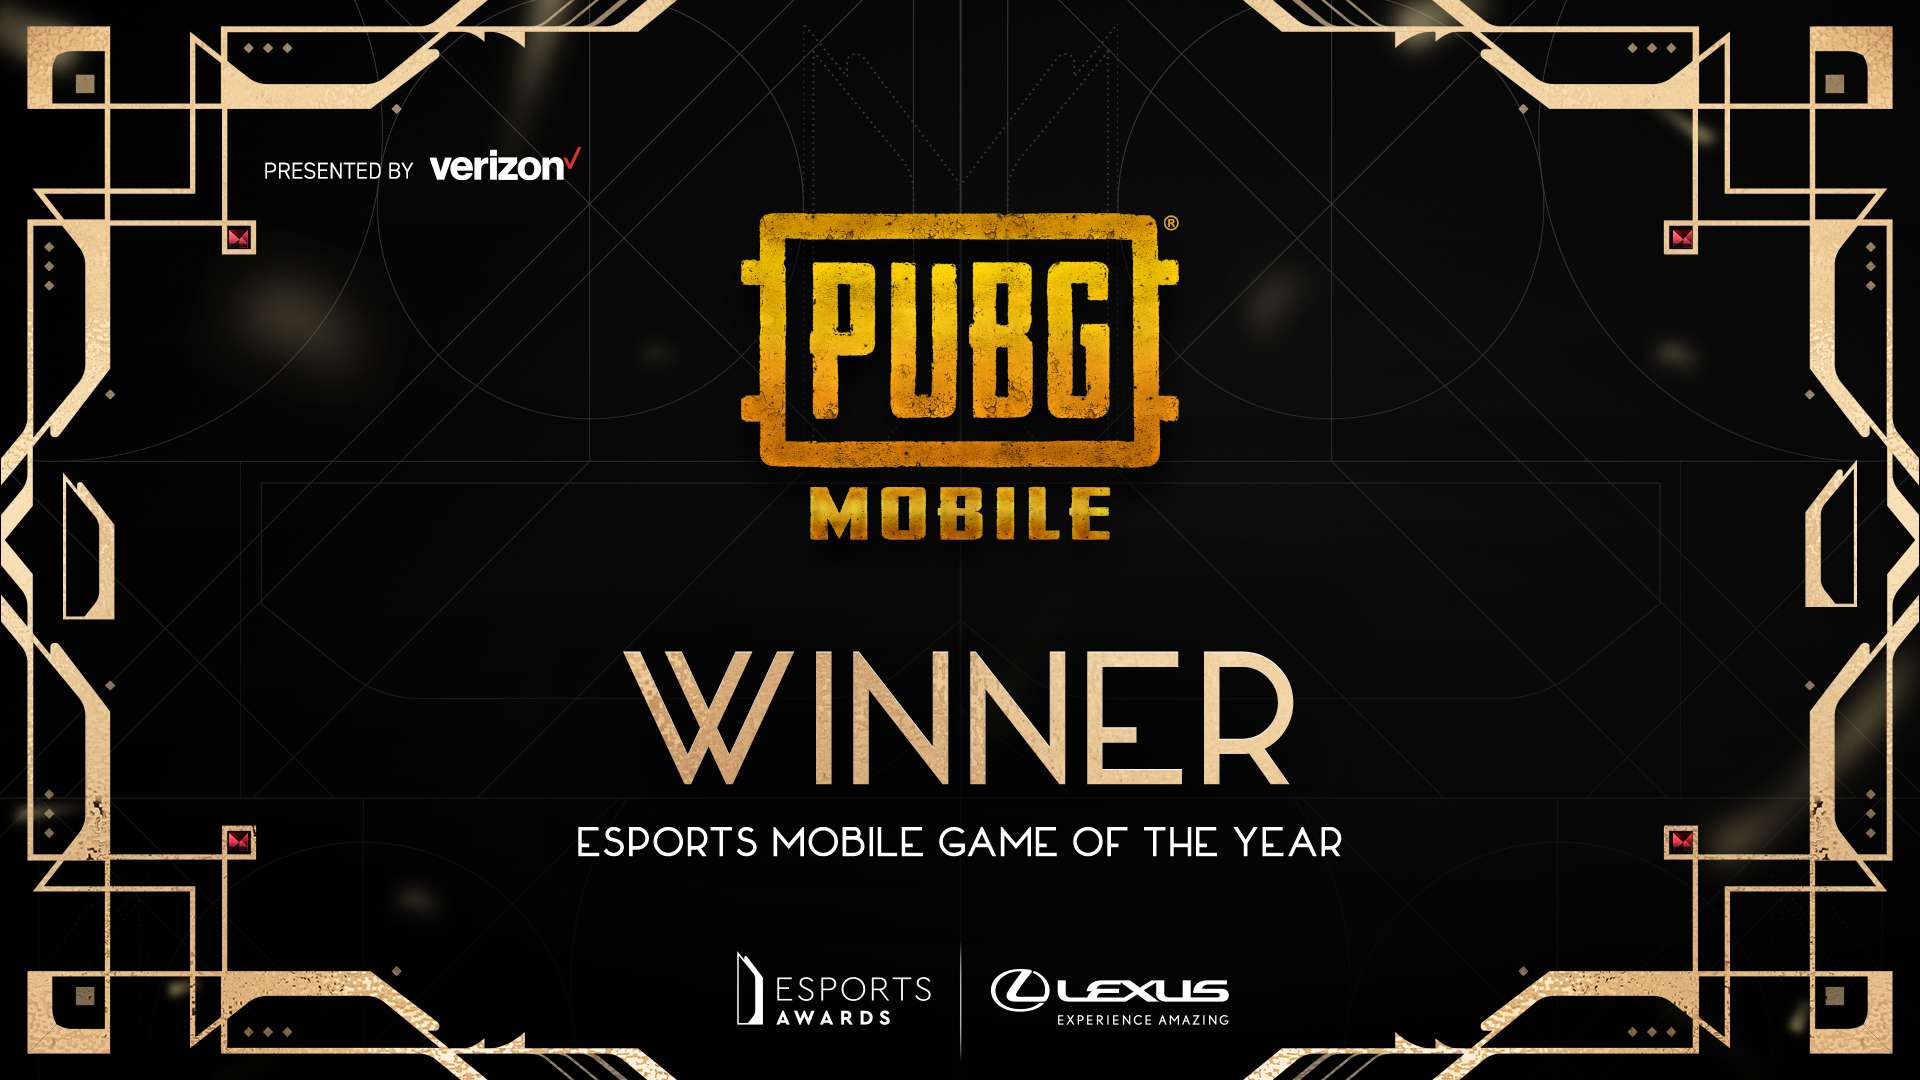 PUBG Mobile giành giải thưởng Esports Mobile Game of the Year.